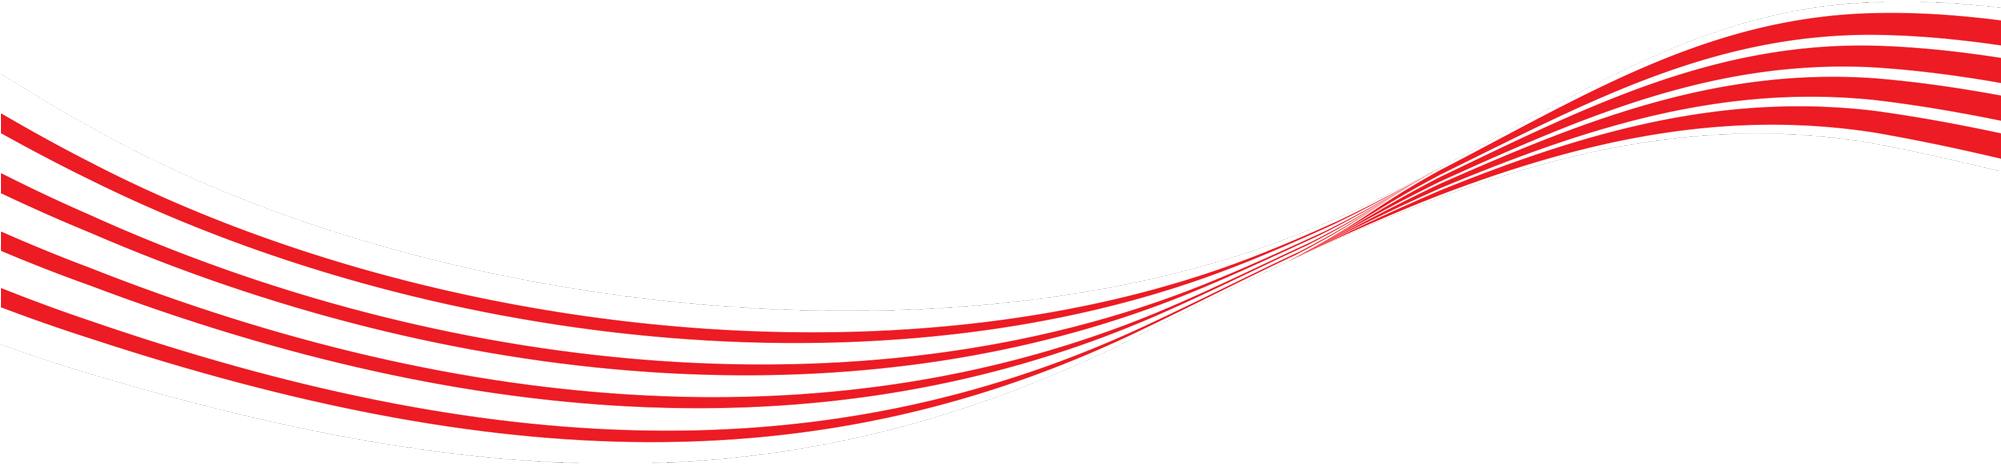 A Global Leader In The Beverage Industry, The Coca-cola - Flag Of The United States (2000x1334)